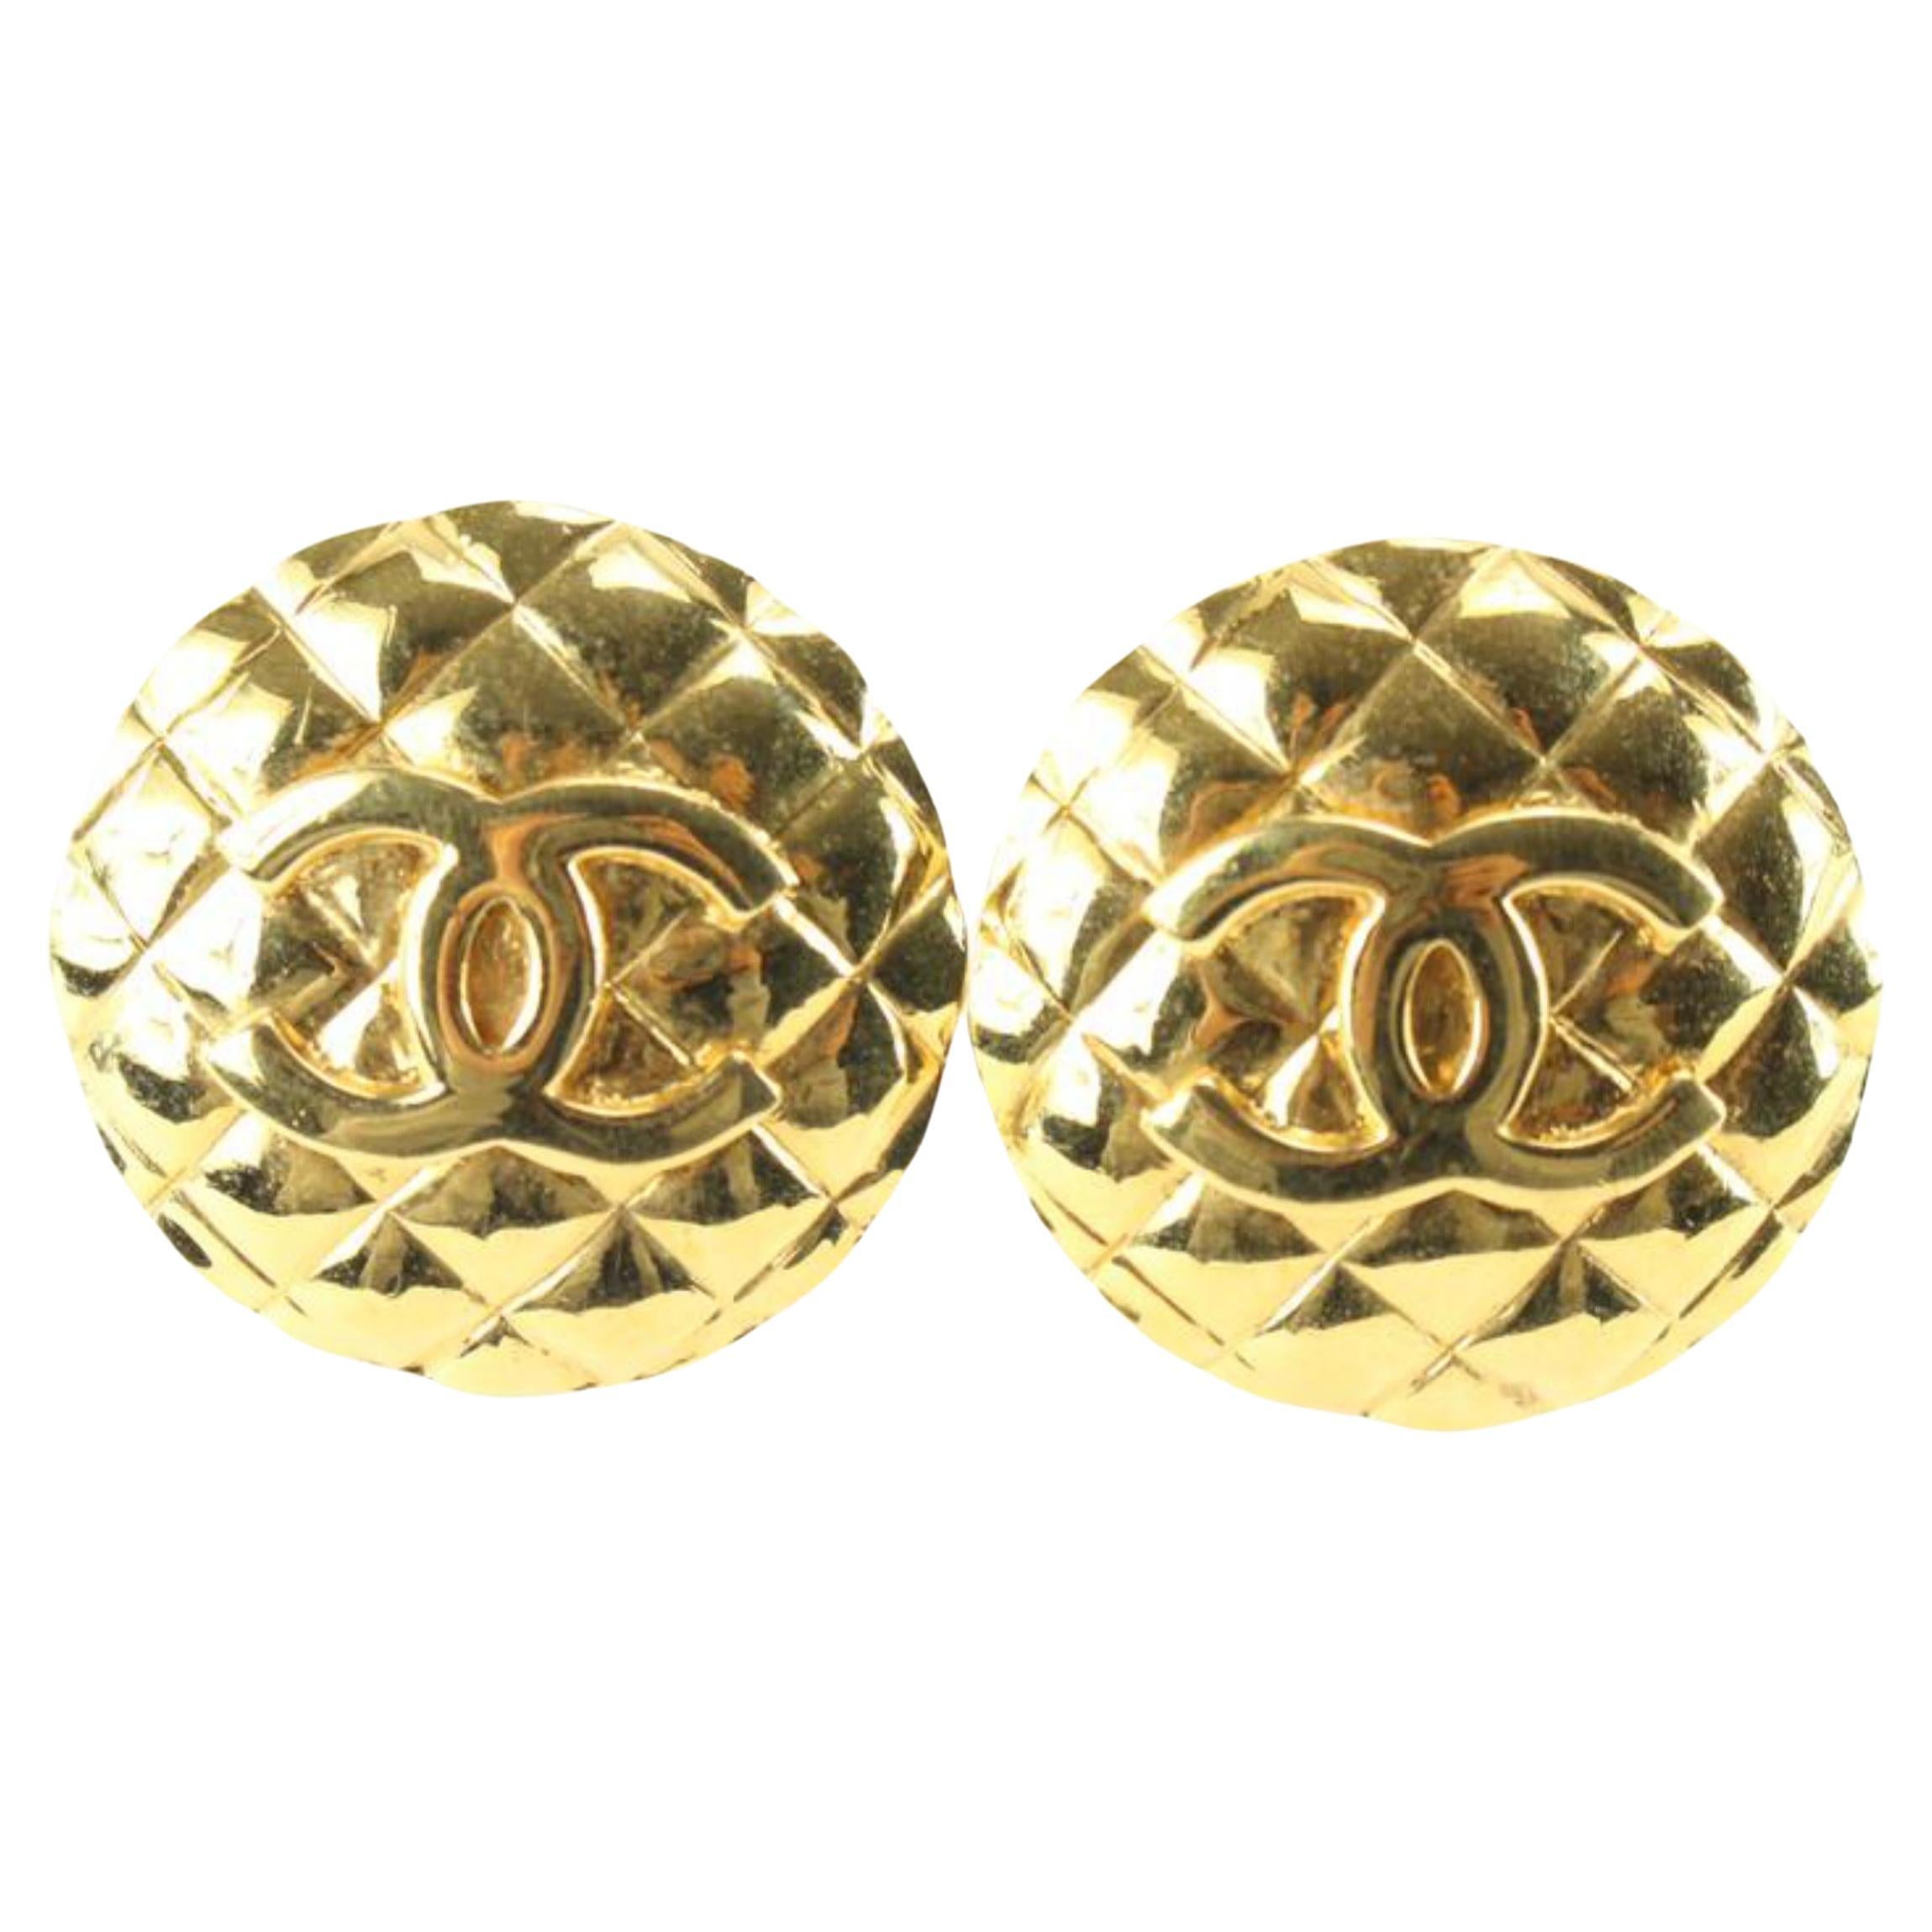 Chanel 24k Gold Plated Quilted CC Logo Earrings 47ck825s